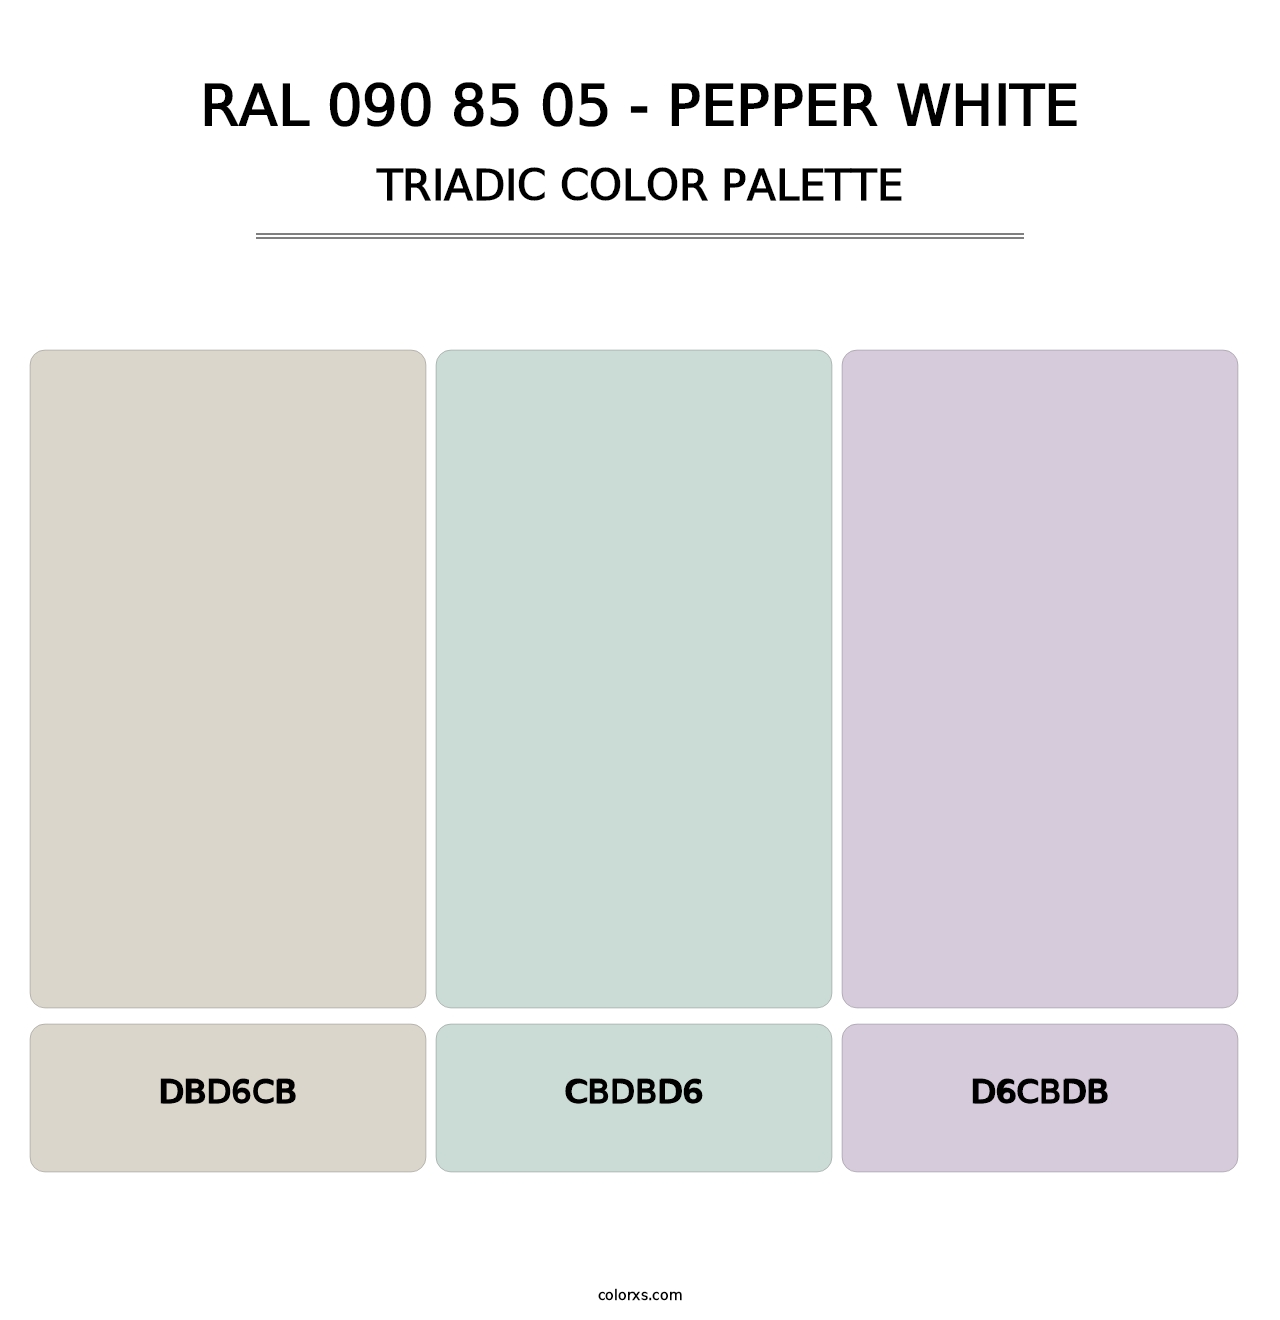 RAL 090 85 05 - Pepper White - Triadic Color Palette